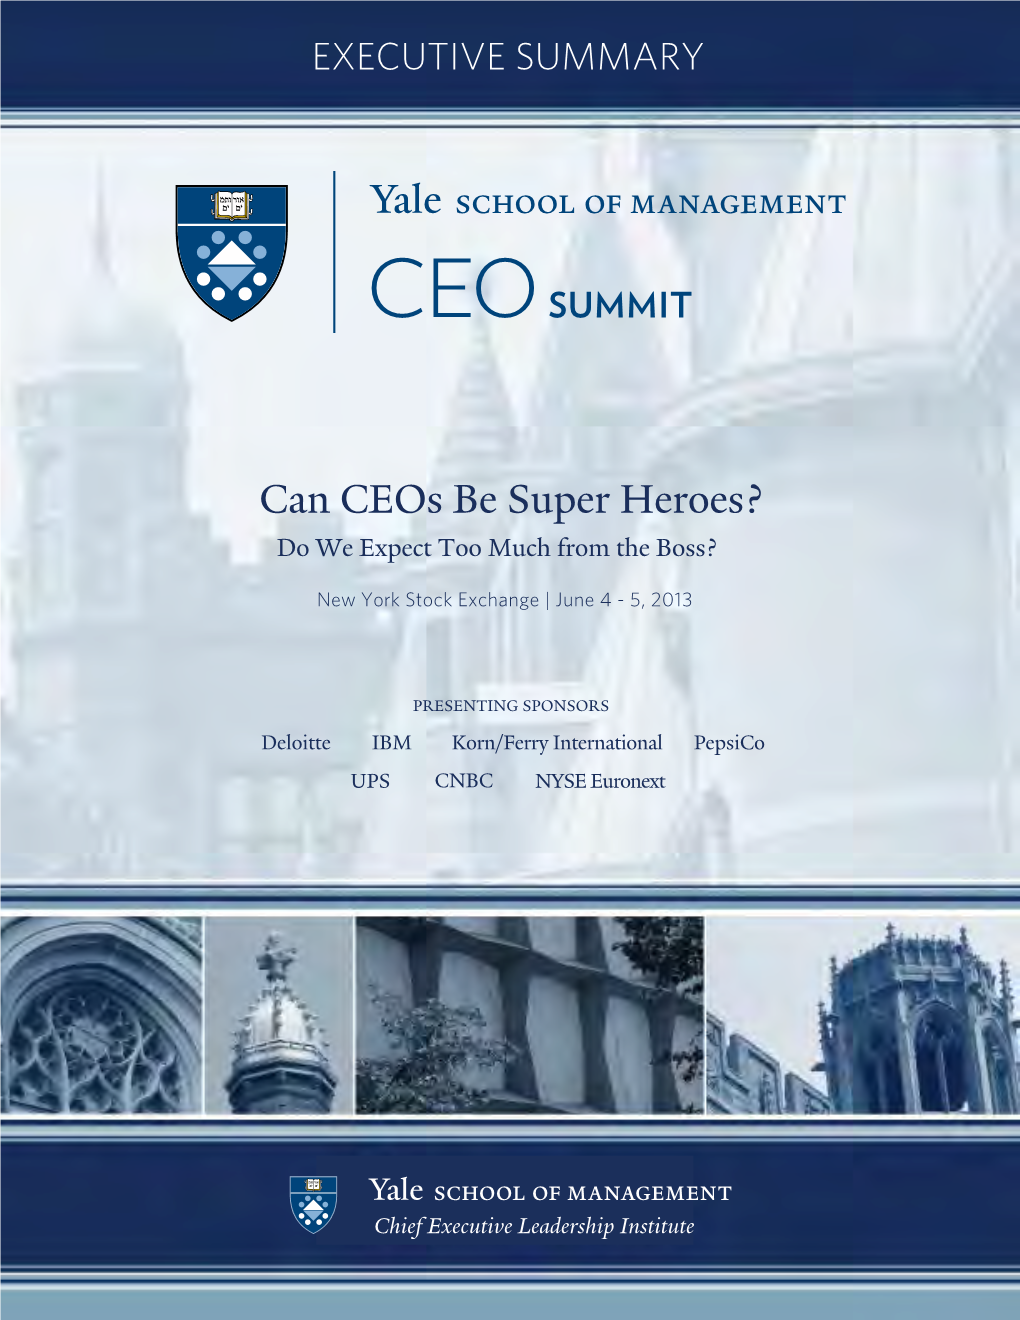 Can Ceos Be Super Heroes? Do We Expect Too Much from the Boss?